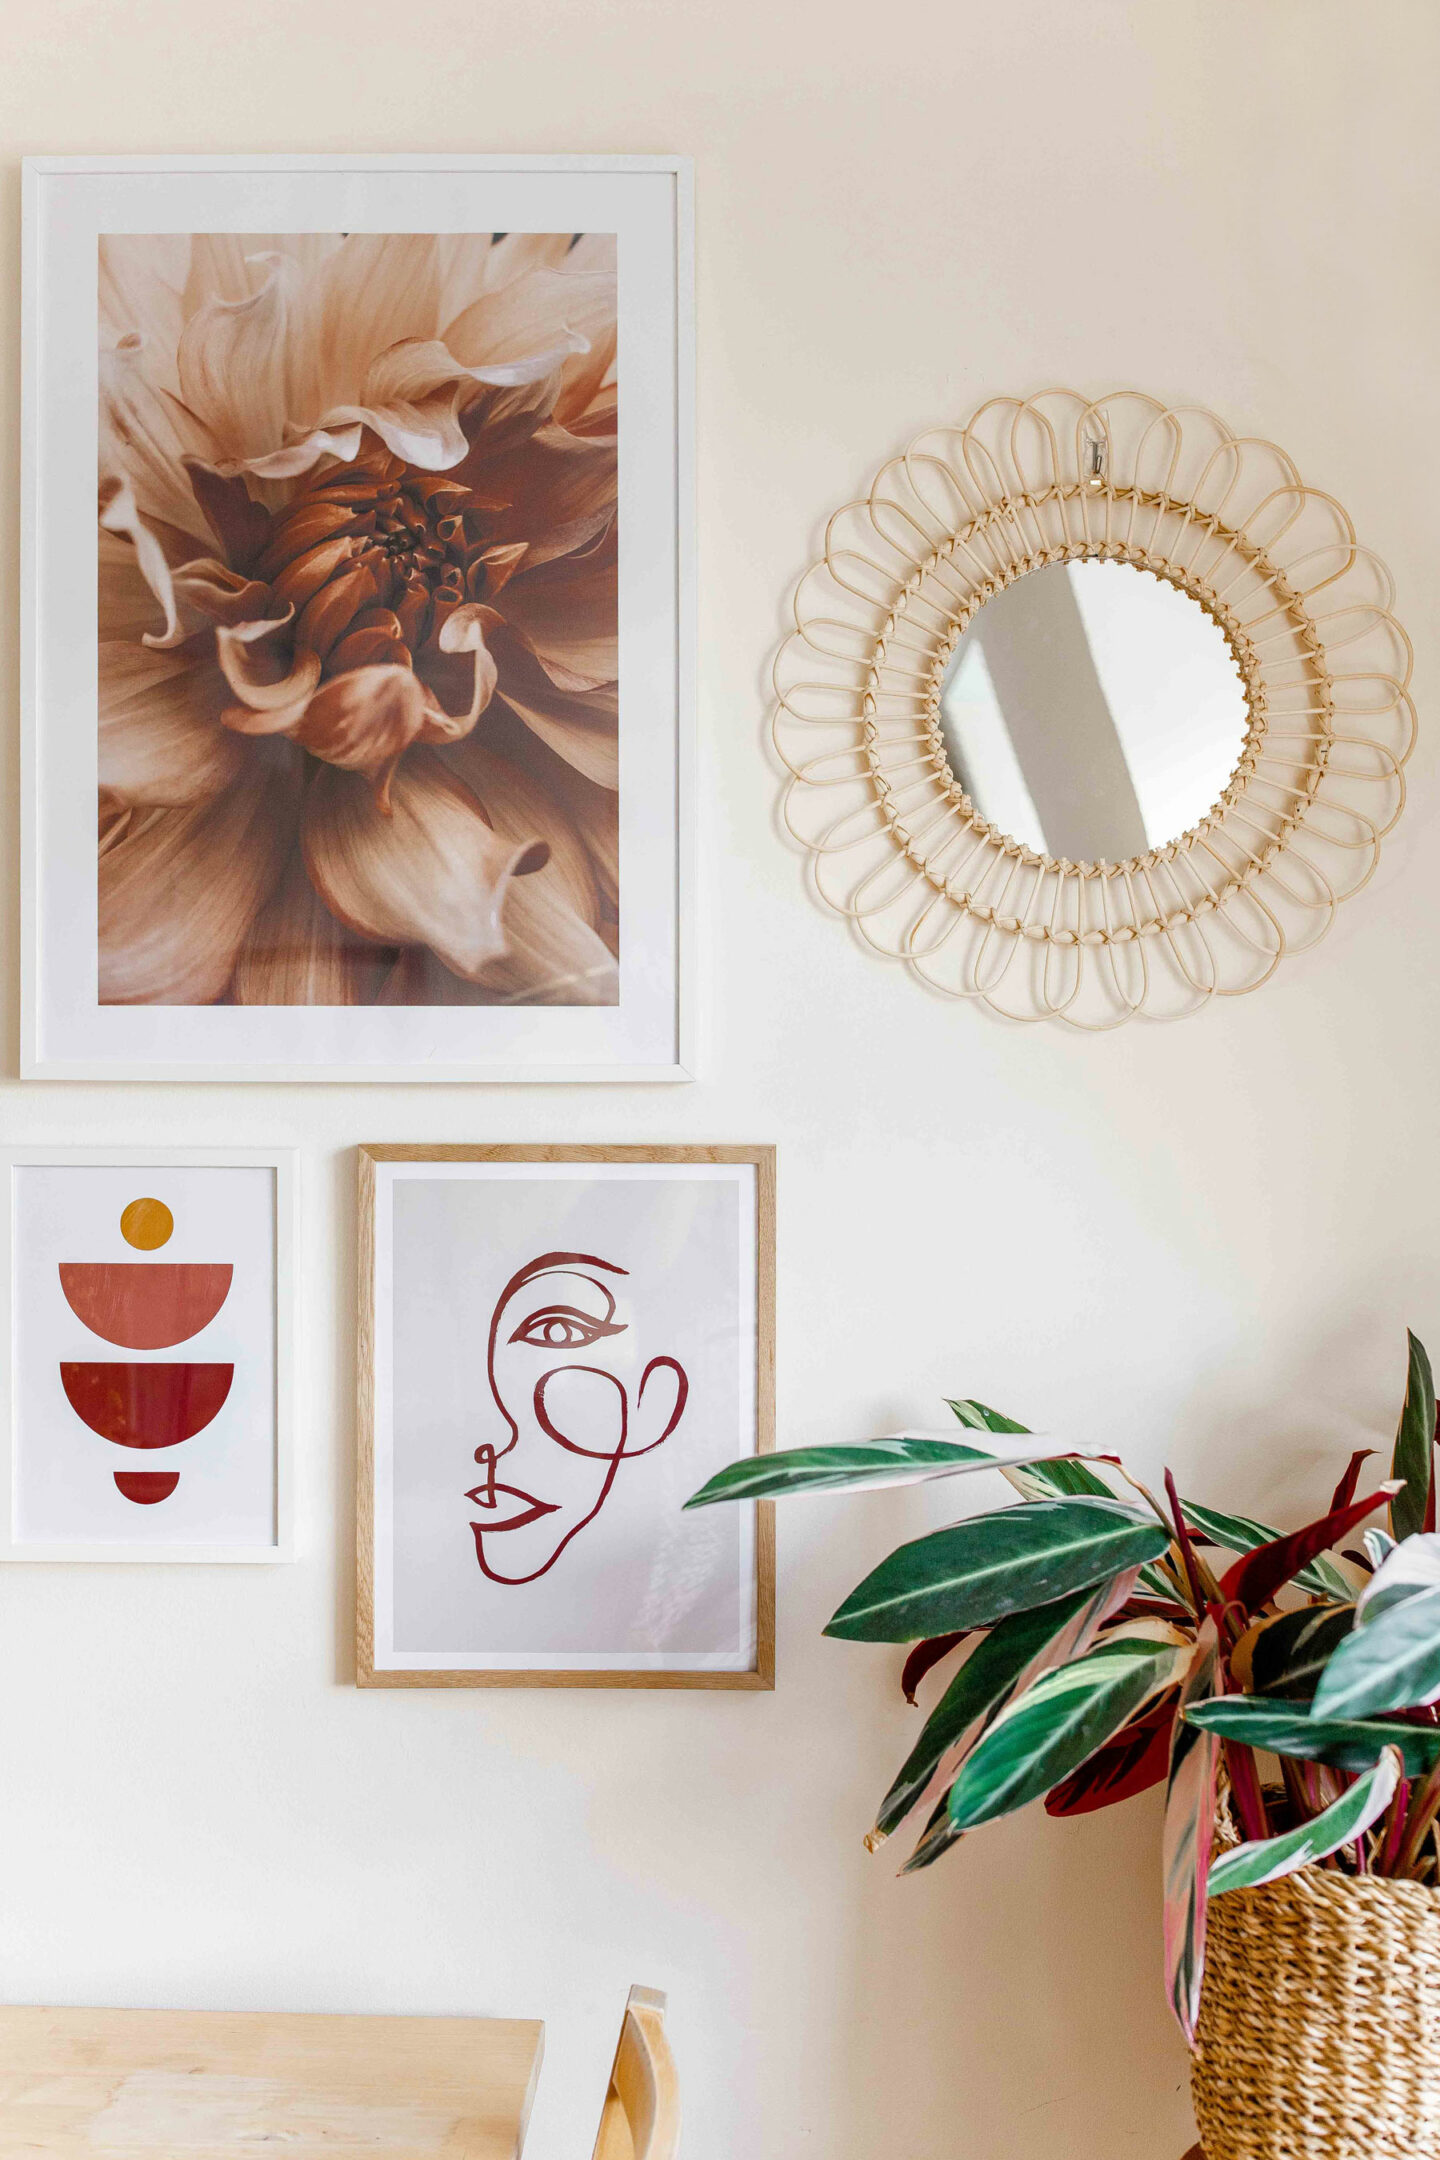 kelseyinlondon homewithkelsey living room makeover desenio gallery wall giveaway